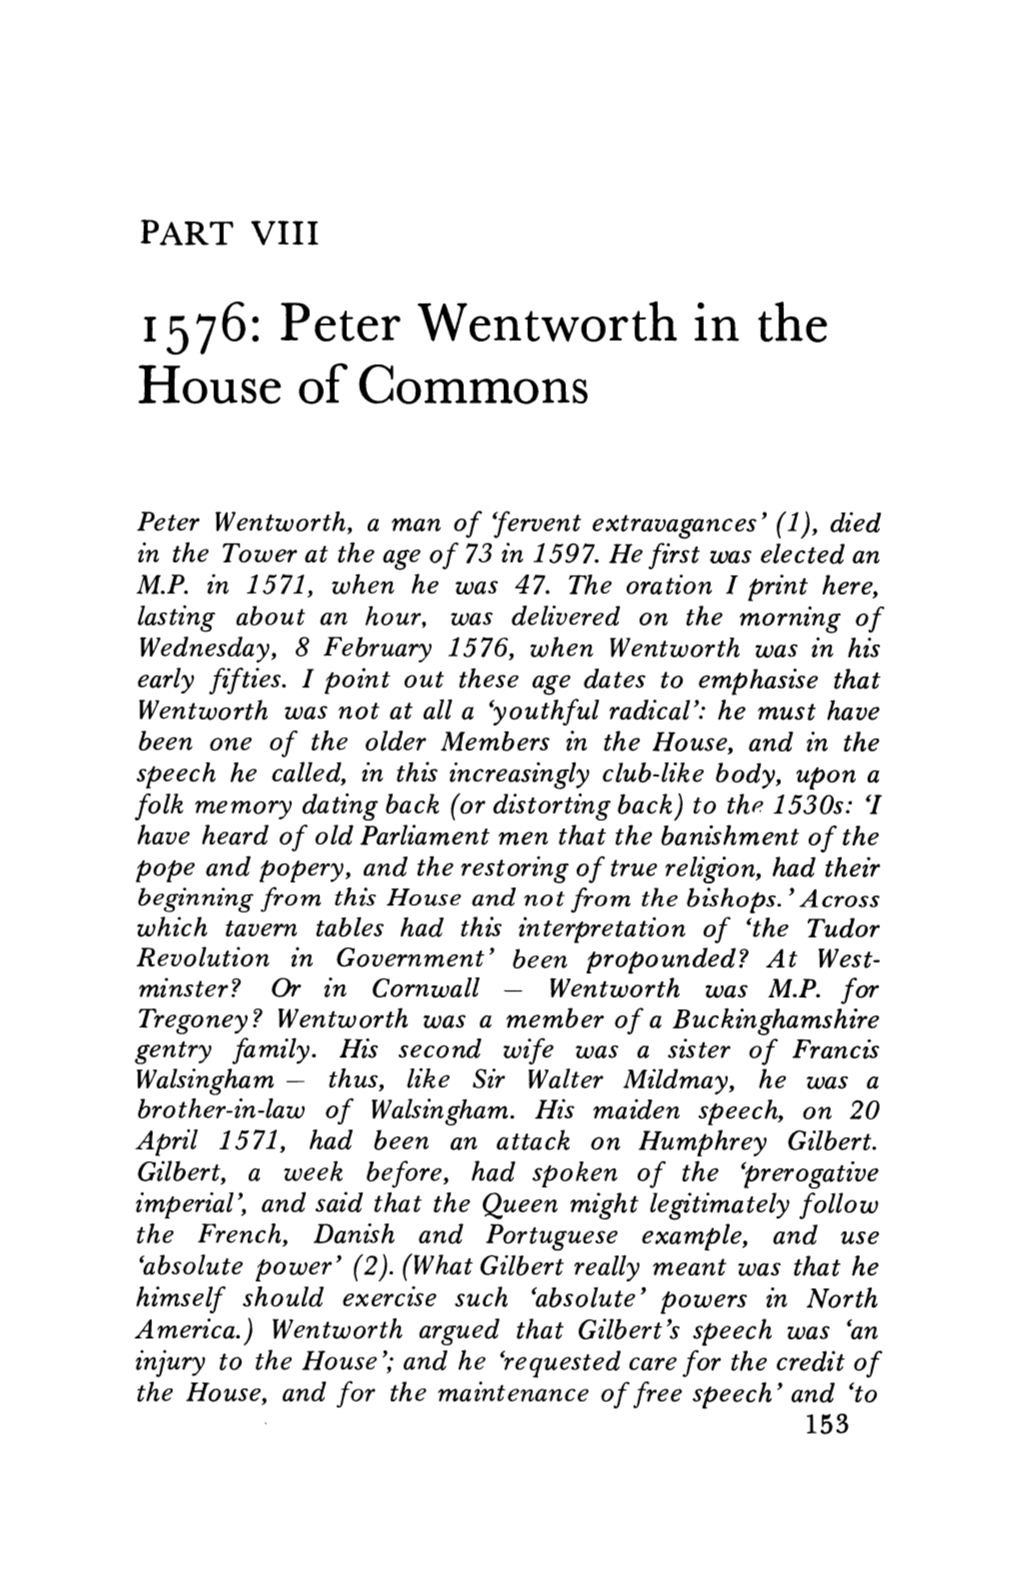 1576: Peter Wentworth in the House of Commons